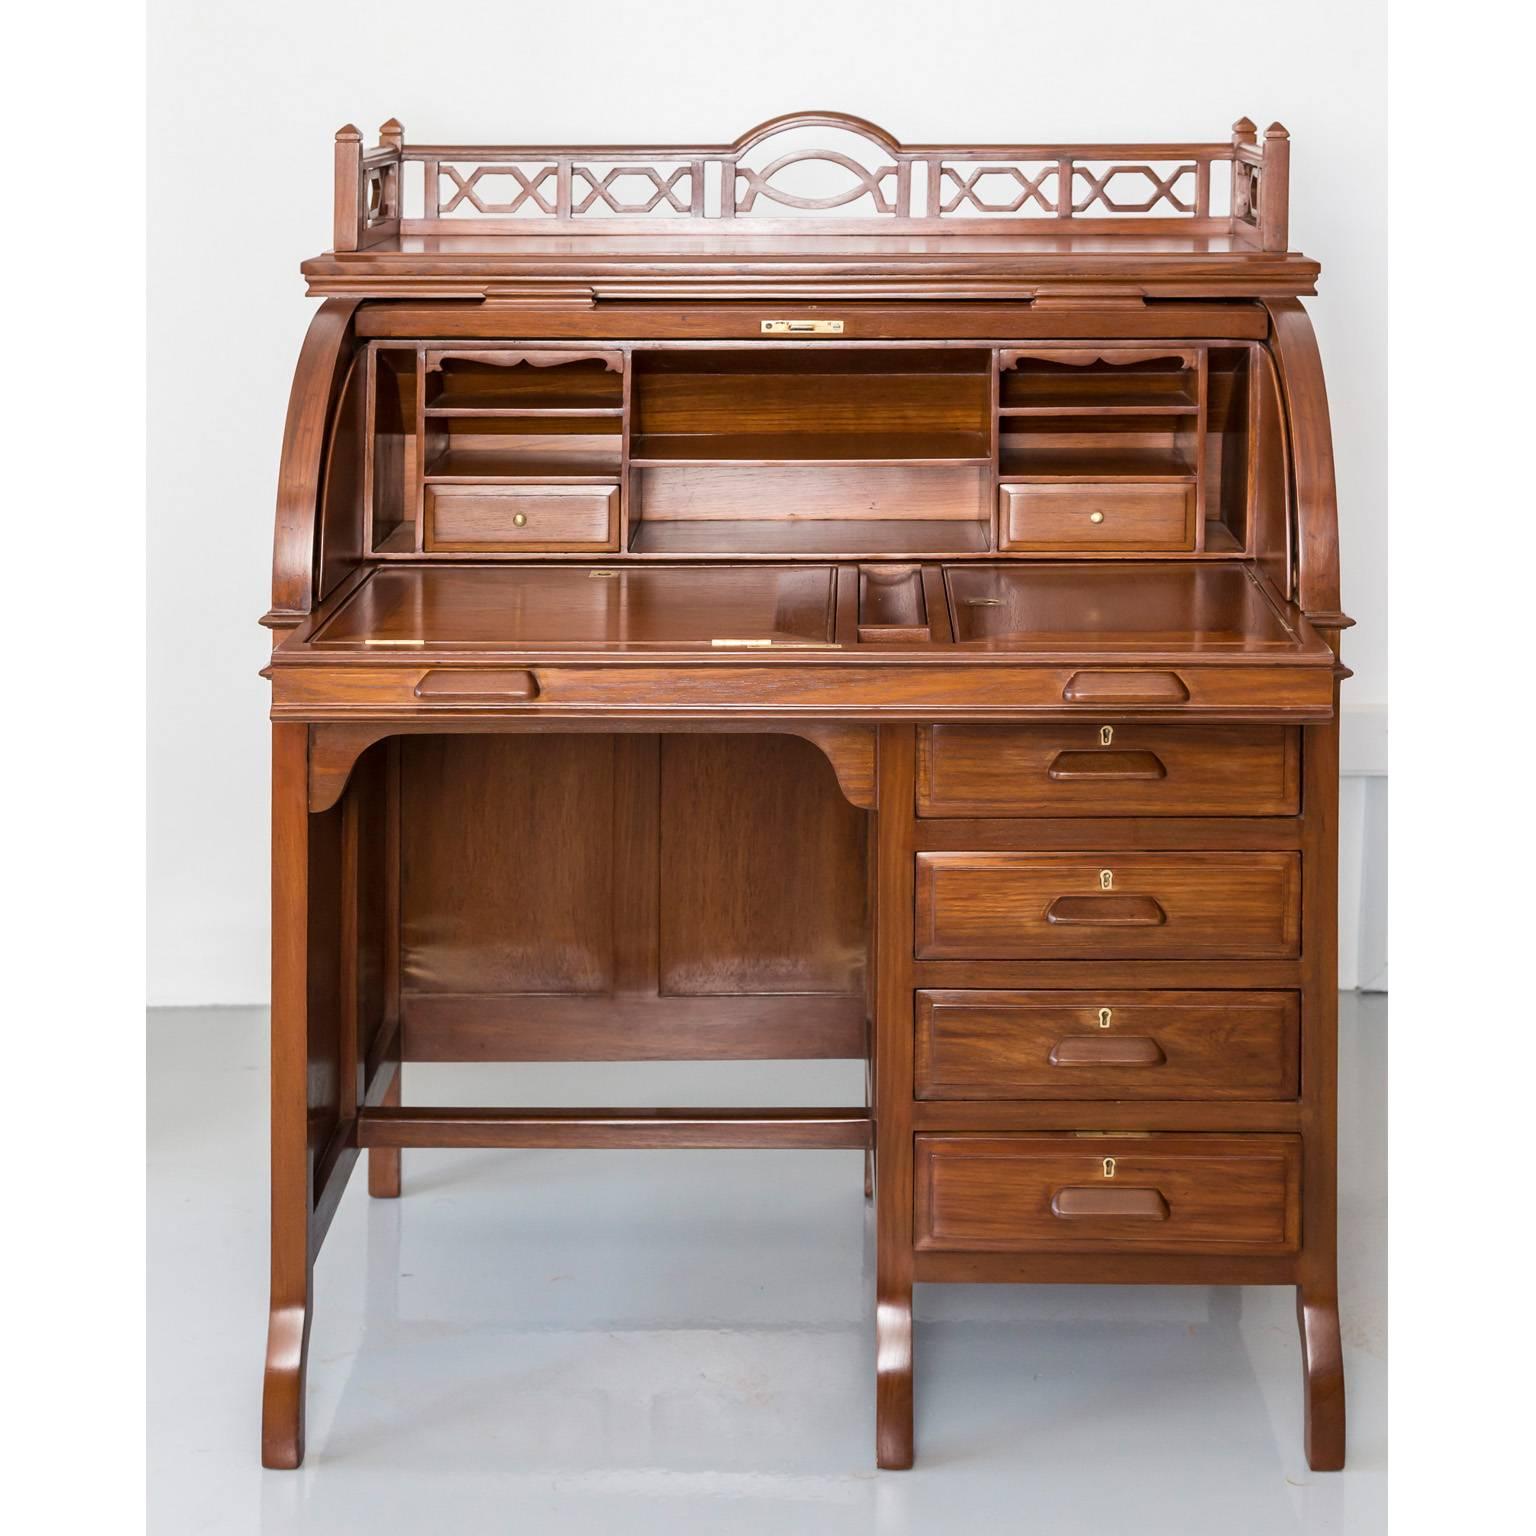 A British Colonial teak wood cylinder desk with a shaped back above a rectangular moulded top and a cylinder fall front. The top opens to reveal a fitted interior which consists of several pigeon holes and two drawers with brass knobs. In addition